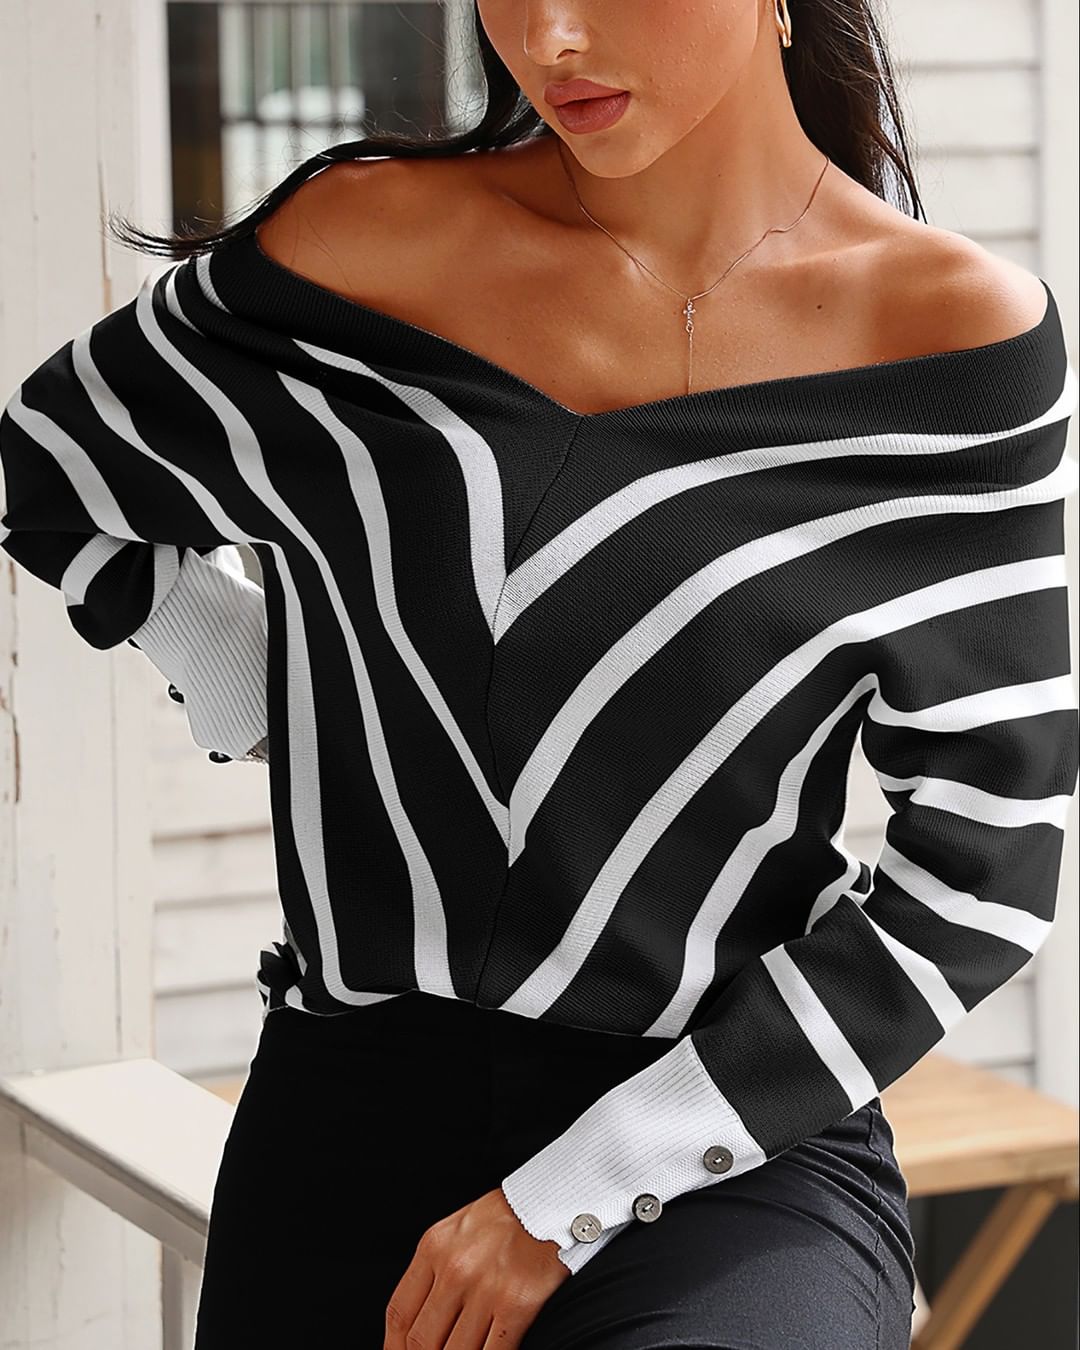 boutiquefeel_official - V Neck Popper Cuff Striped Casual Sweater⁠
Click boutiquefeel.com ACC1630  to search  get the specific price and size.⁠
 #fashion #ootd #style